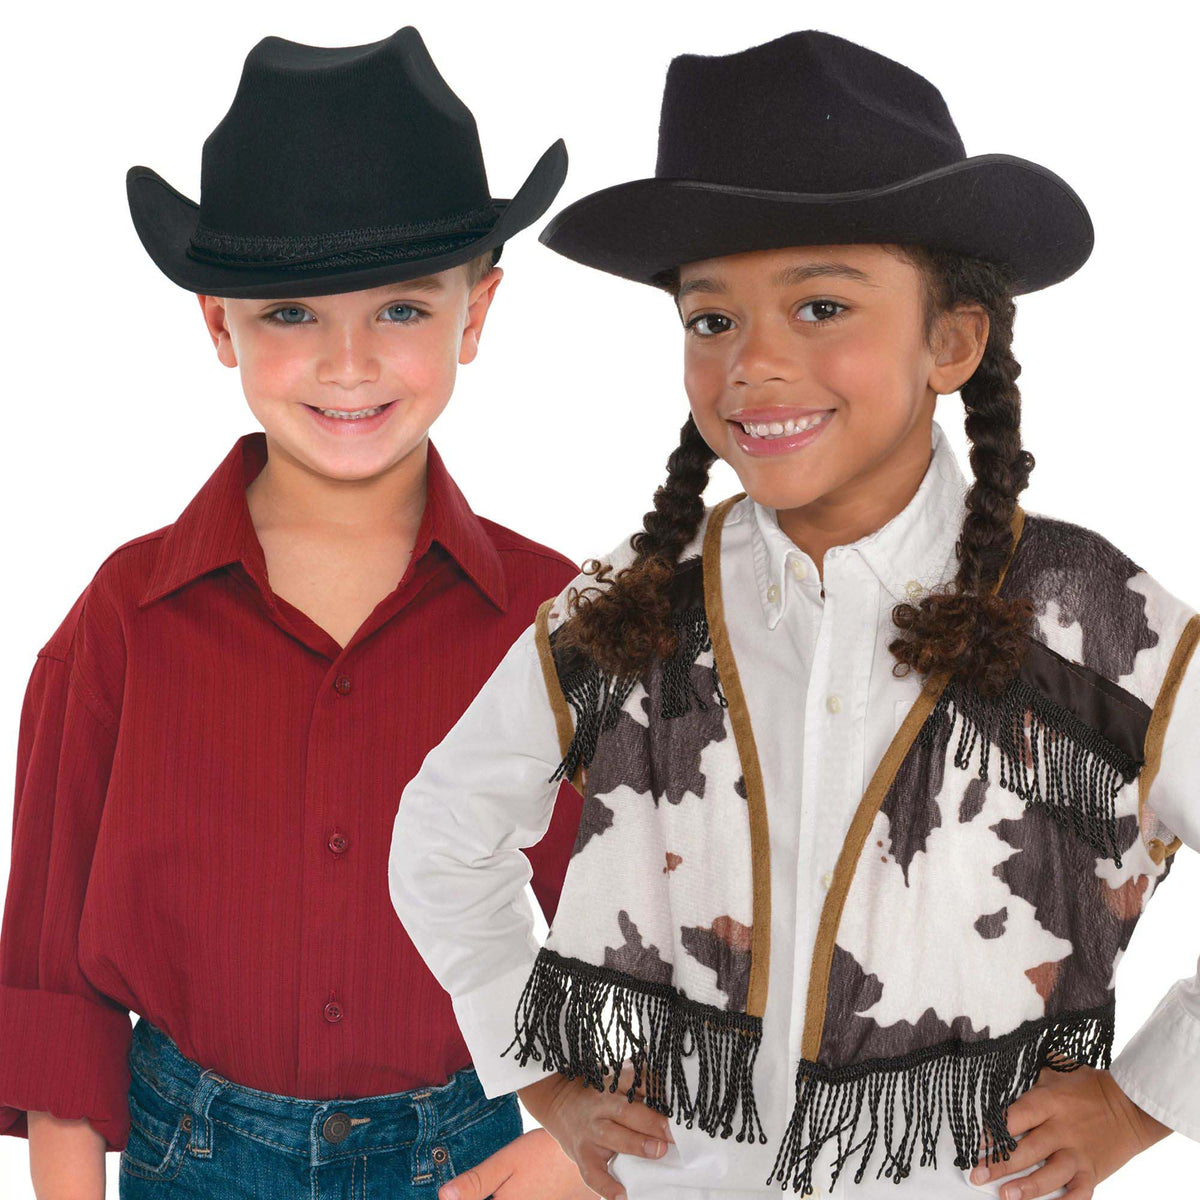 KBW GLOBAL CORP Costume Accessories Black Cowboy Hat for Kids